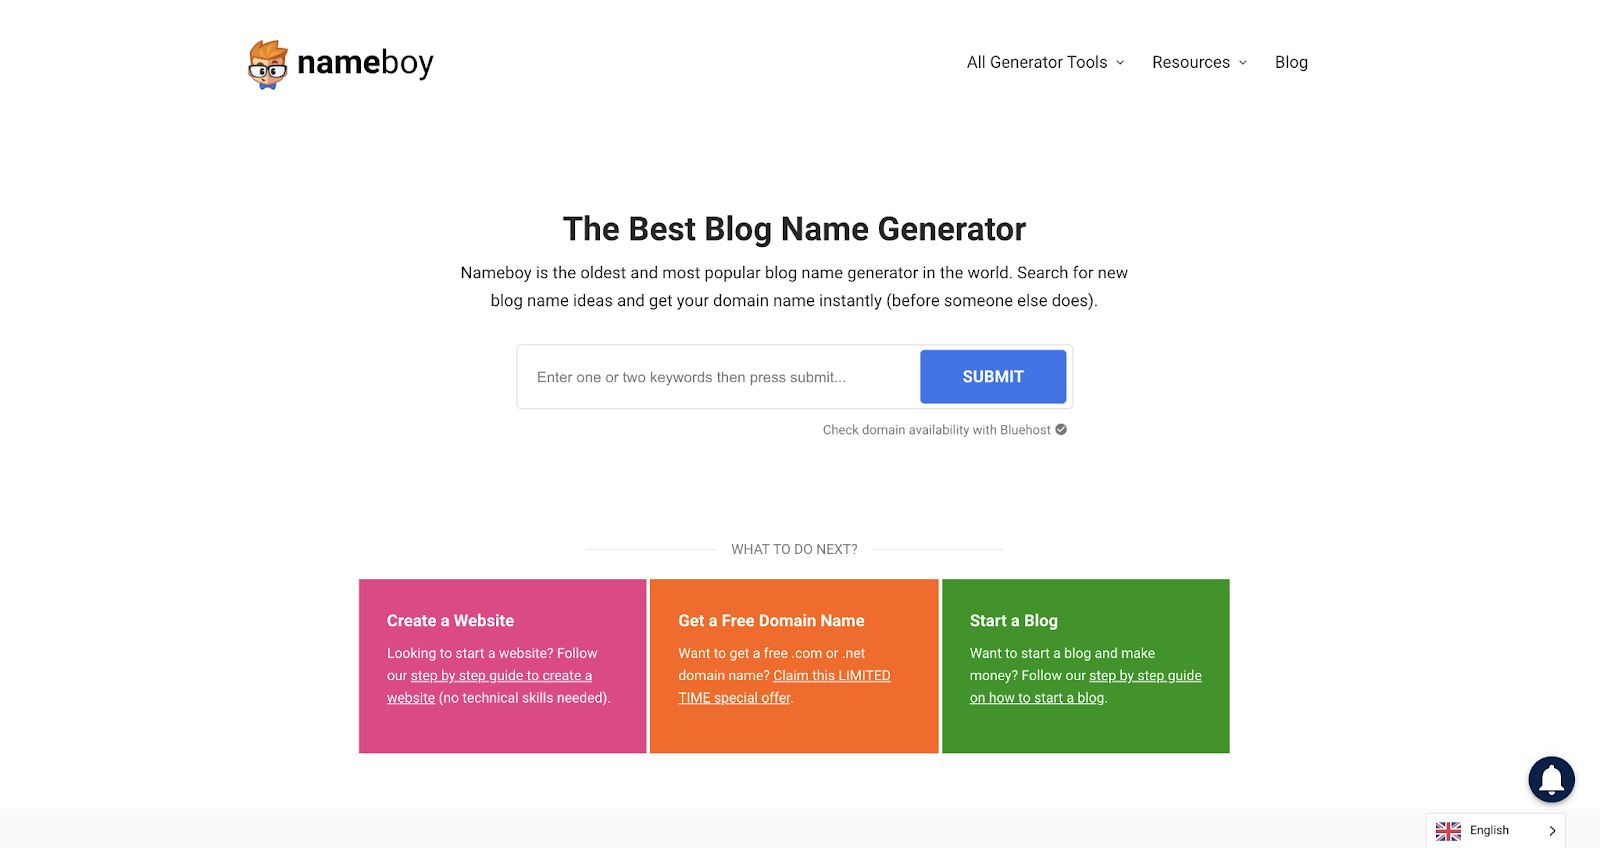 Nameboy can give you a name and connect you to a hosting provider